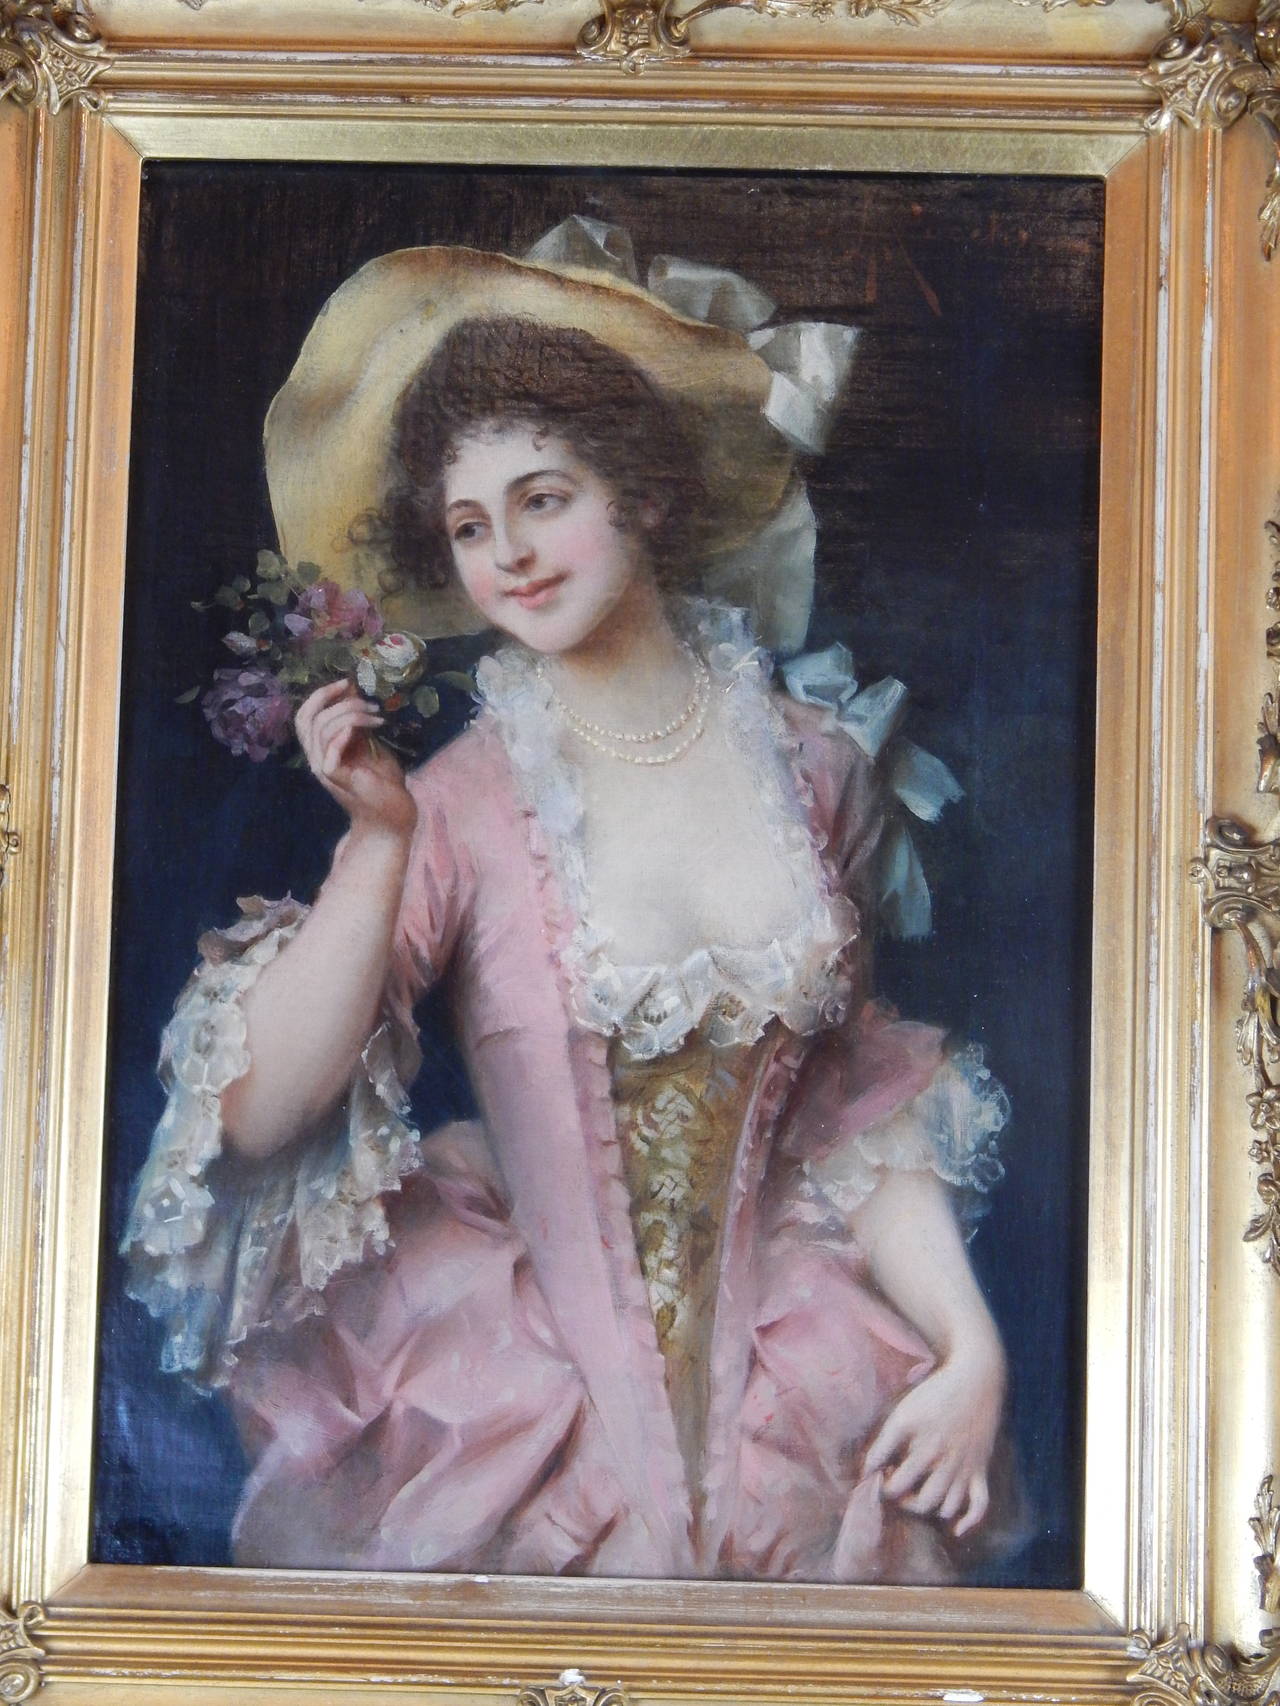 Adriano Cecchi, 1850-1936
A beautifully executed oil on canvas of a pretty woman in a pink dress, holding flowers, Signed A. Cecchi, in a giltwood frame.